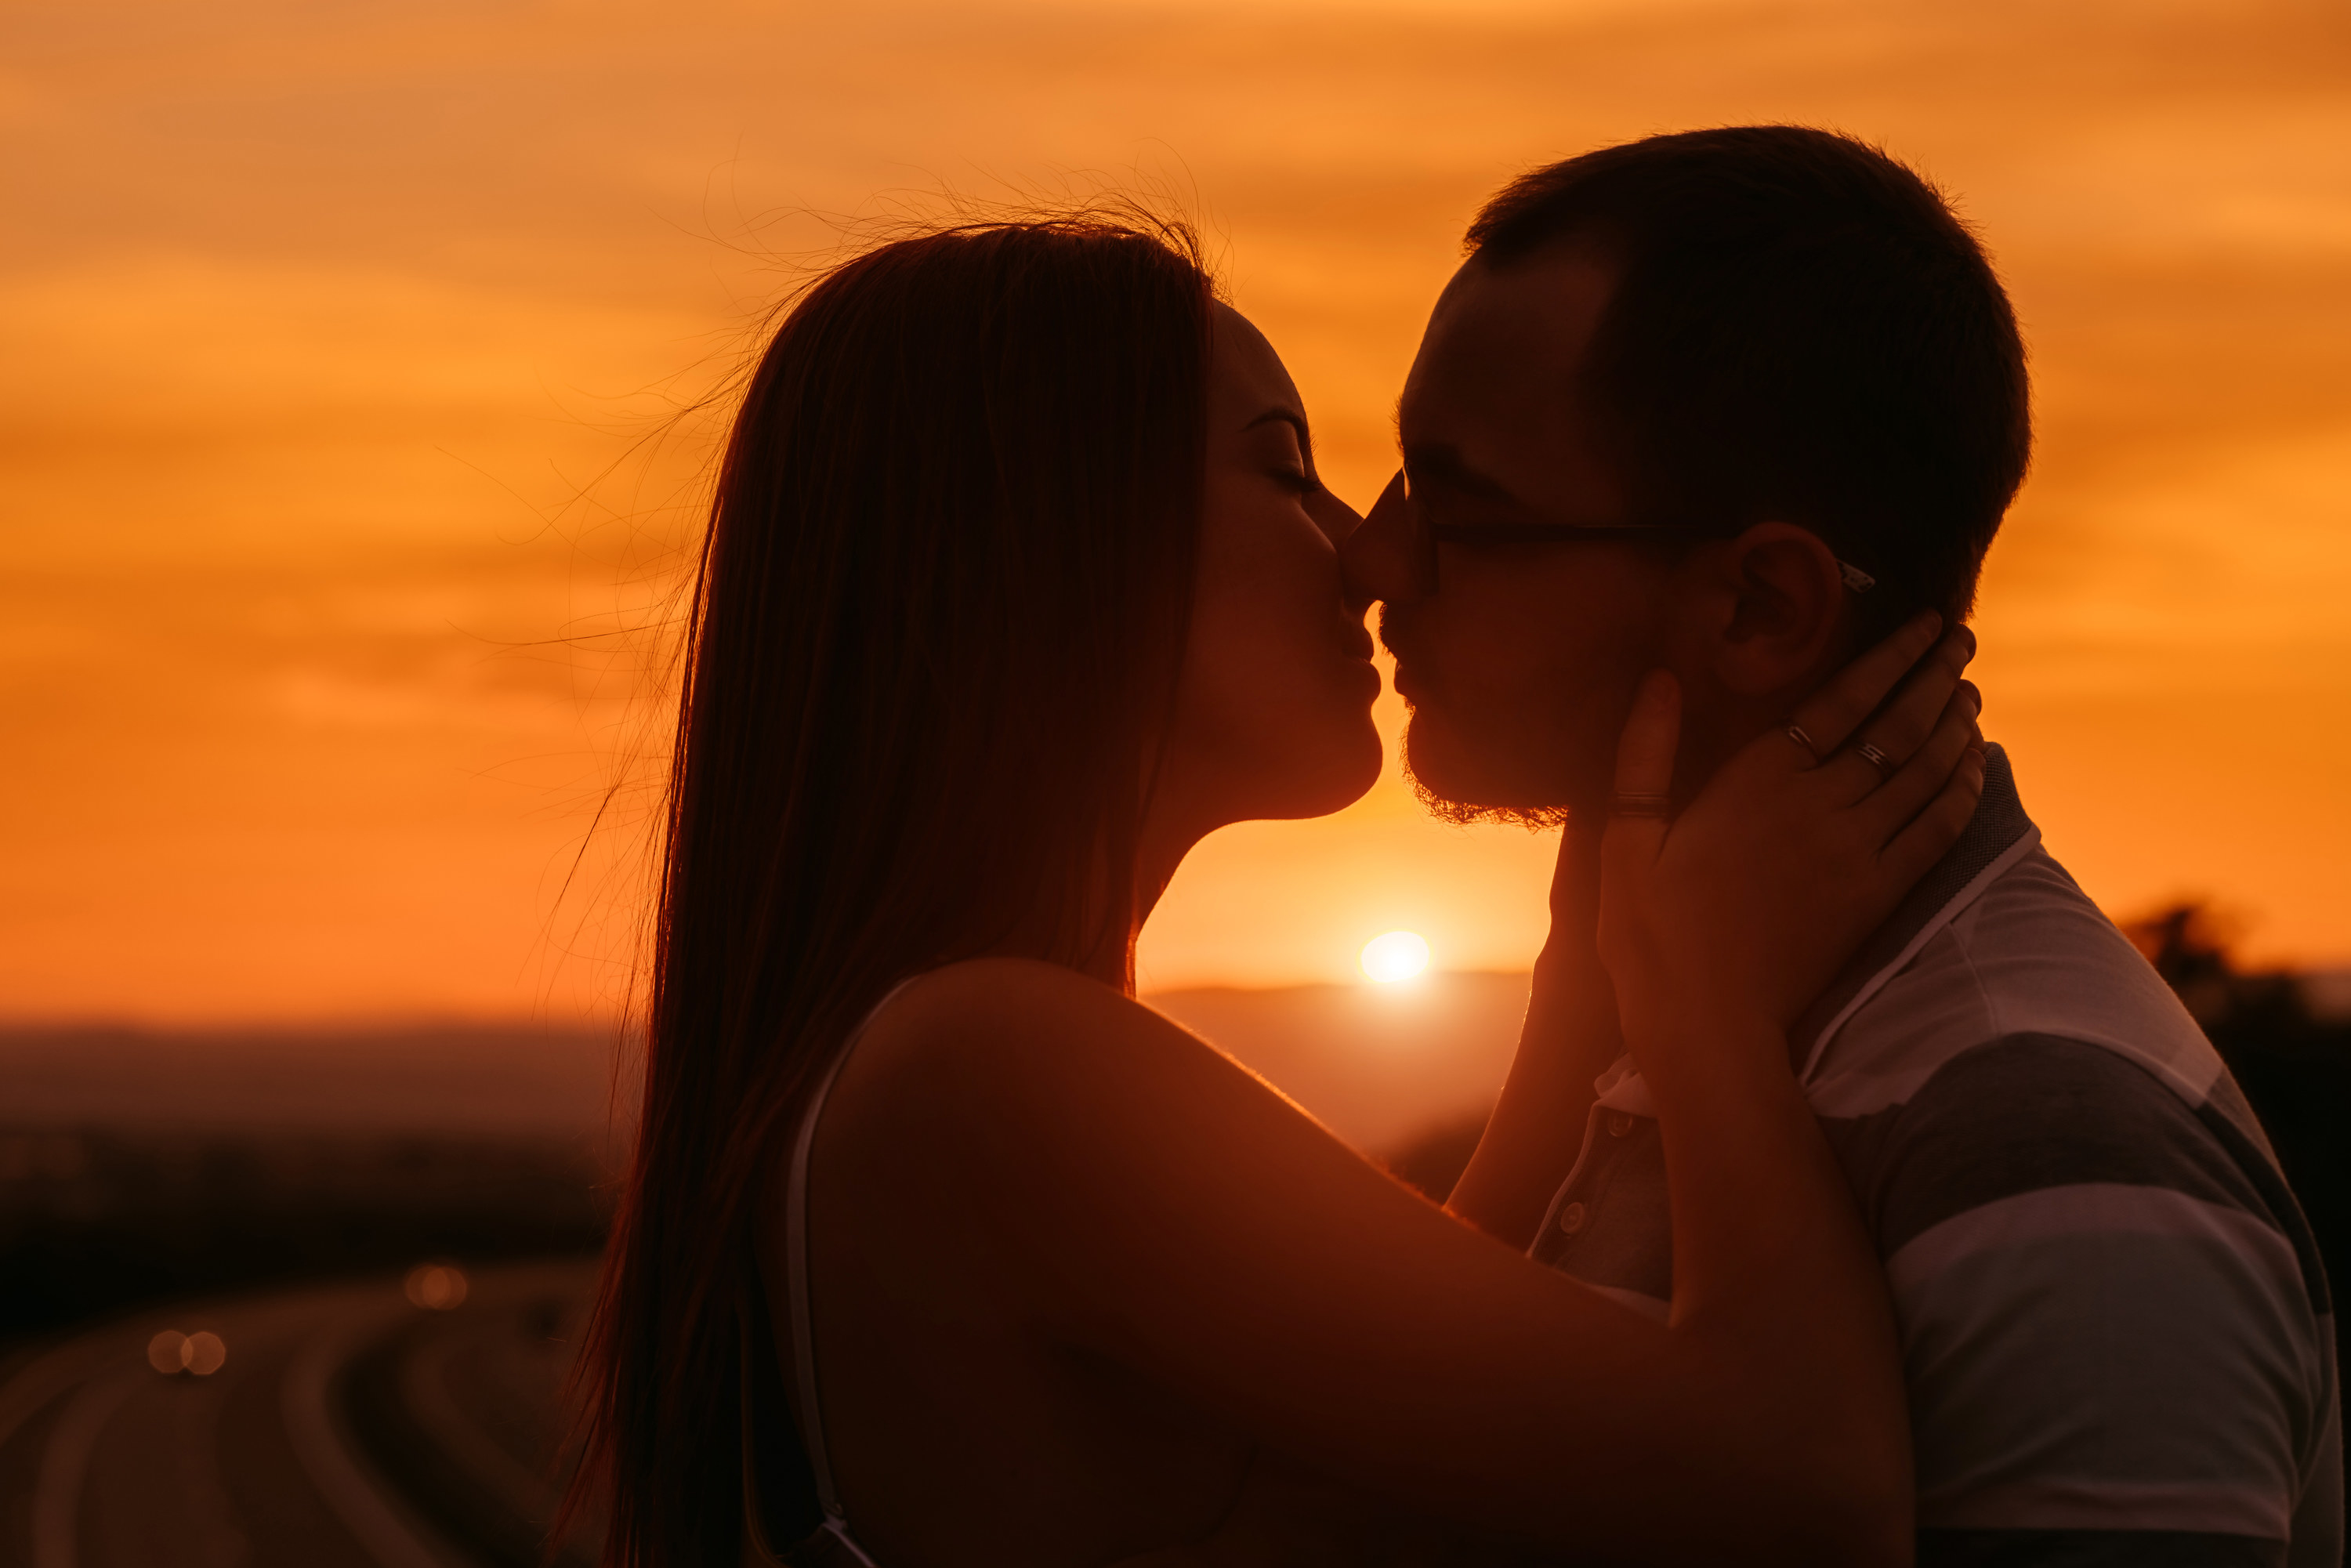 Two people kissing with the setting sun behind them